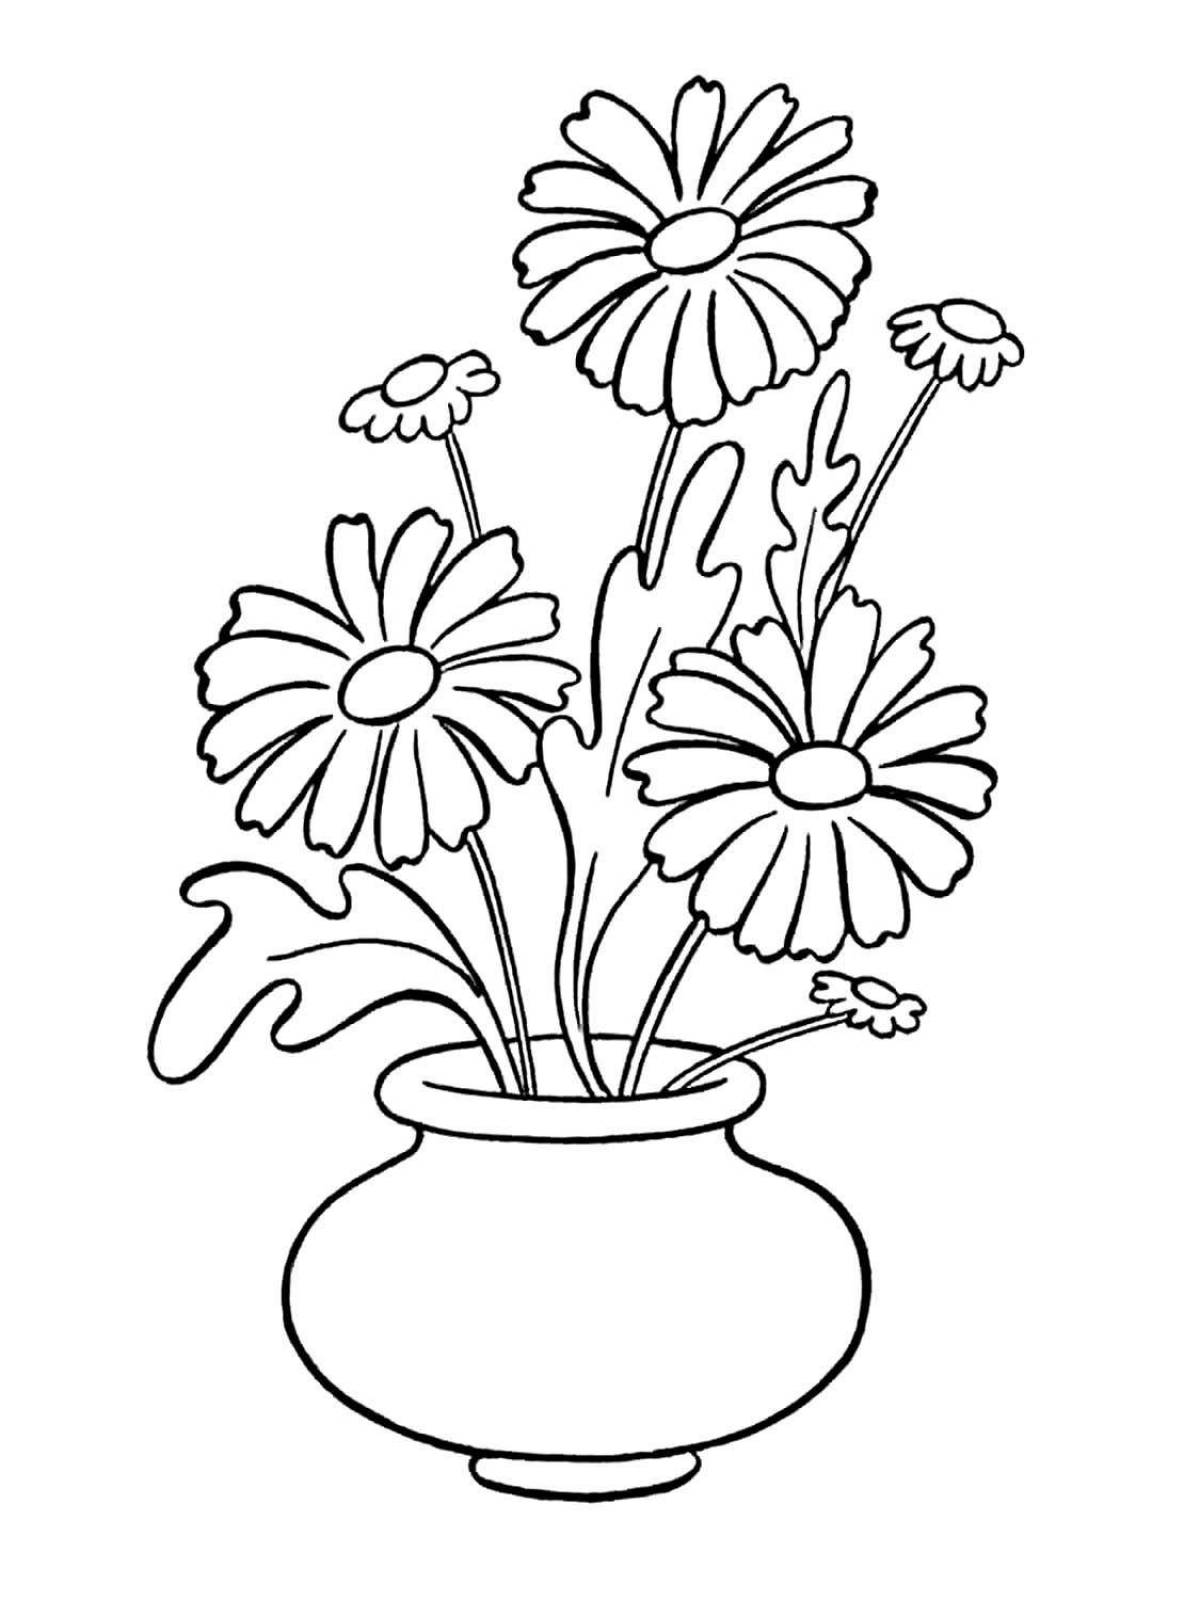 Joyful coloring flowers in a vase for children 6-7 years old